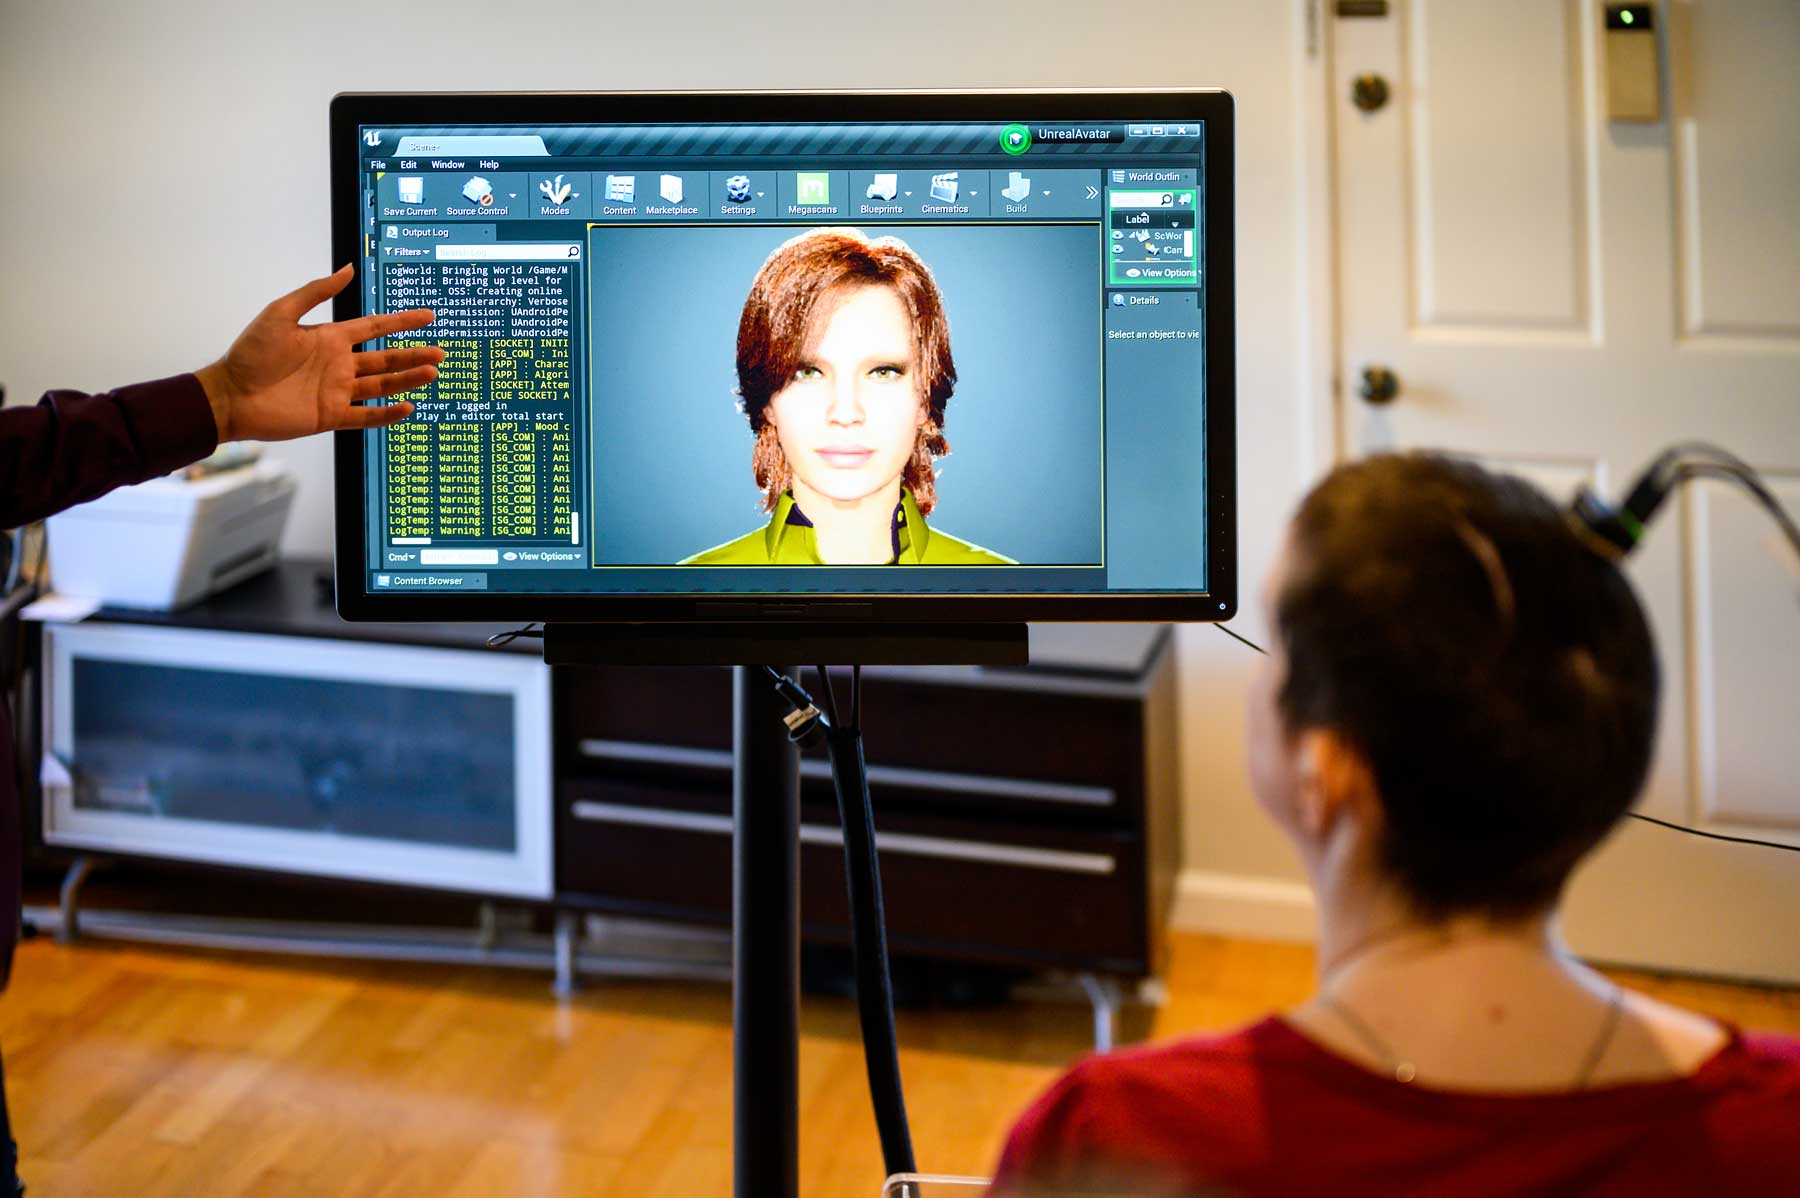 A woman calmly looks at a screen with a 3D avatar that resembles her. The real woman has a buzzed haircut, and has wires protruding from her head that measure her brainwaves to produce speech from muscle movement.